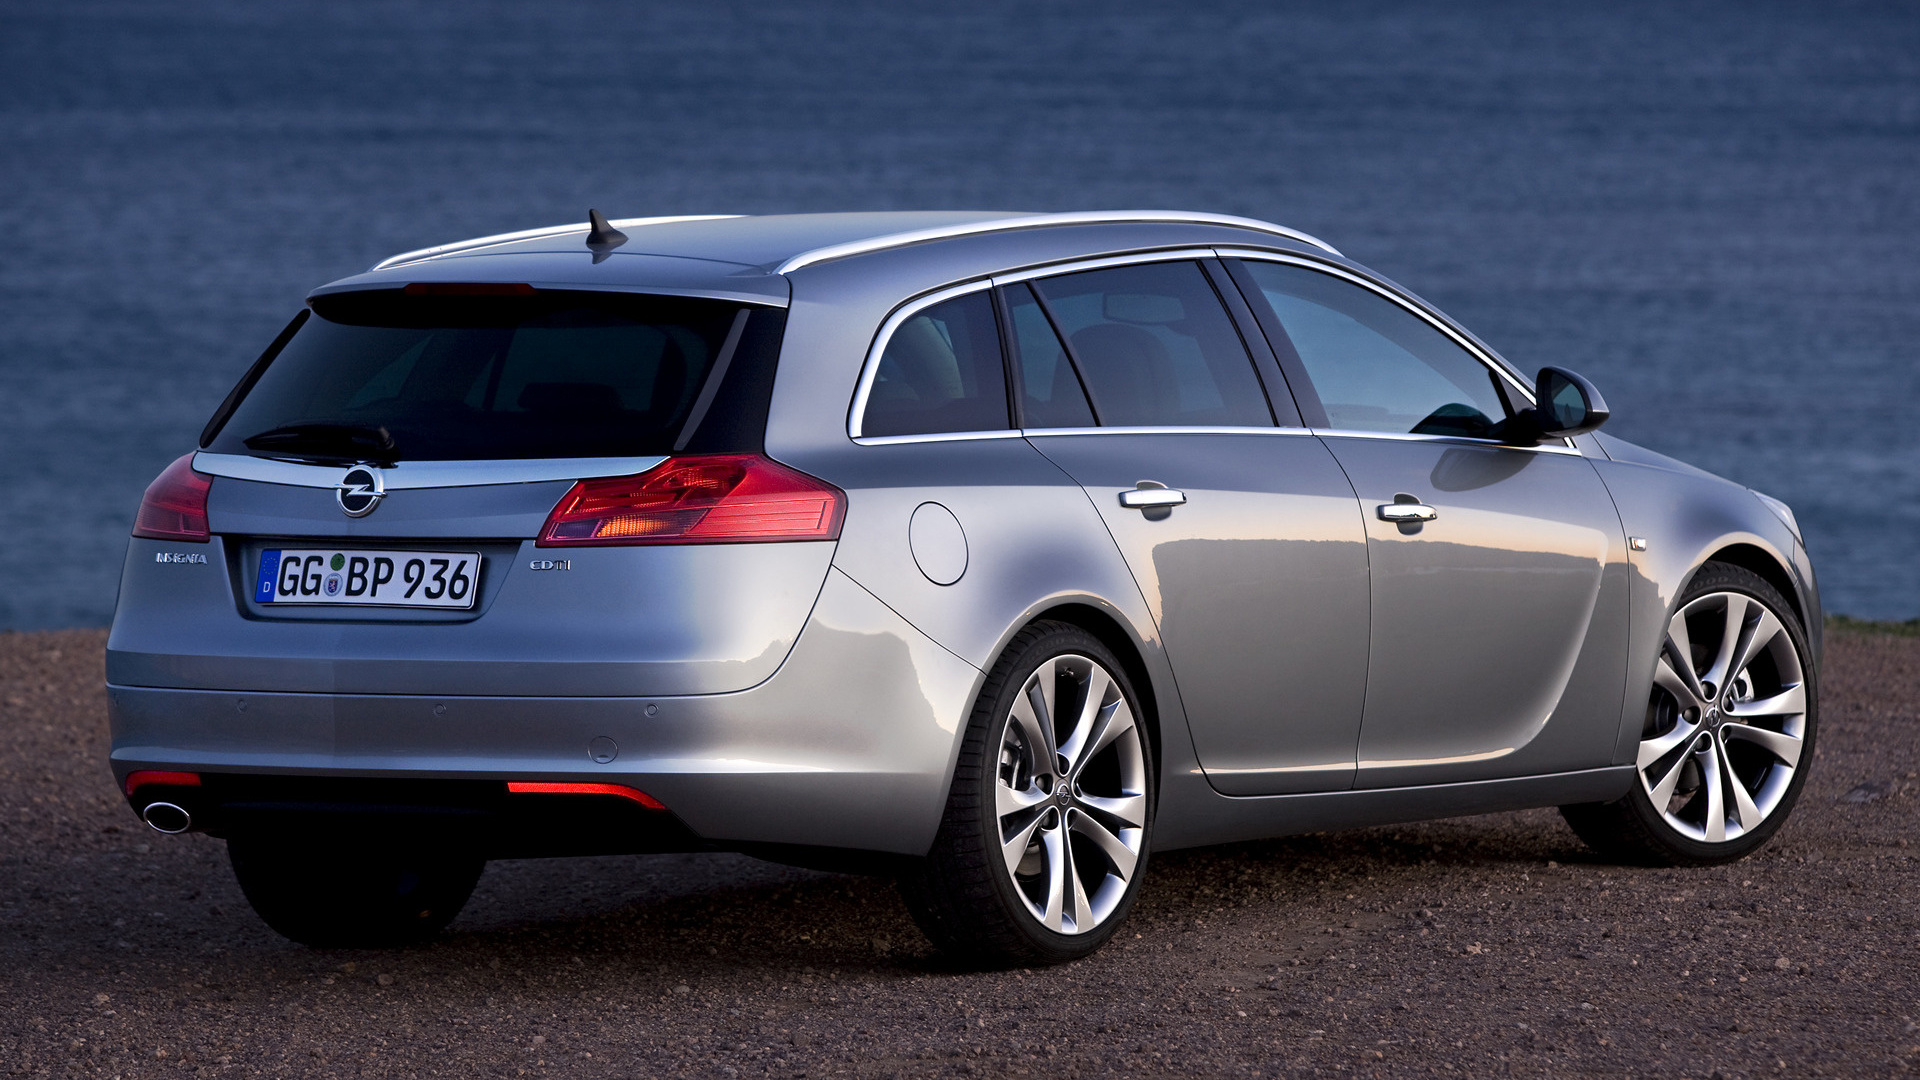 Opel insignia sports tourer hi-res stock photography and images - Alamy